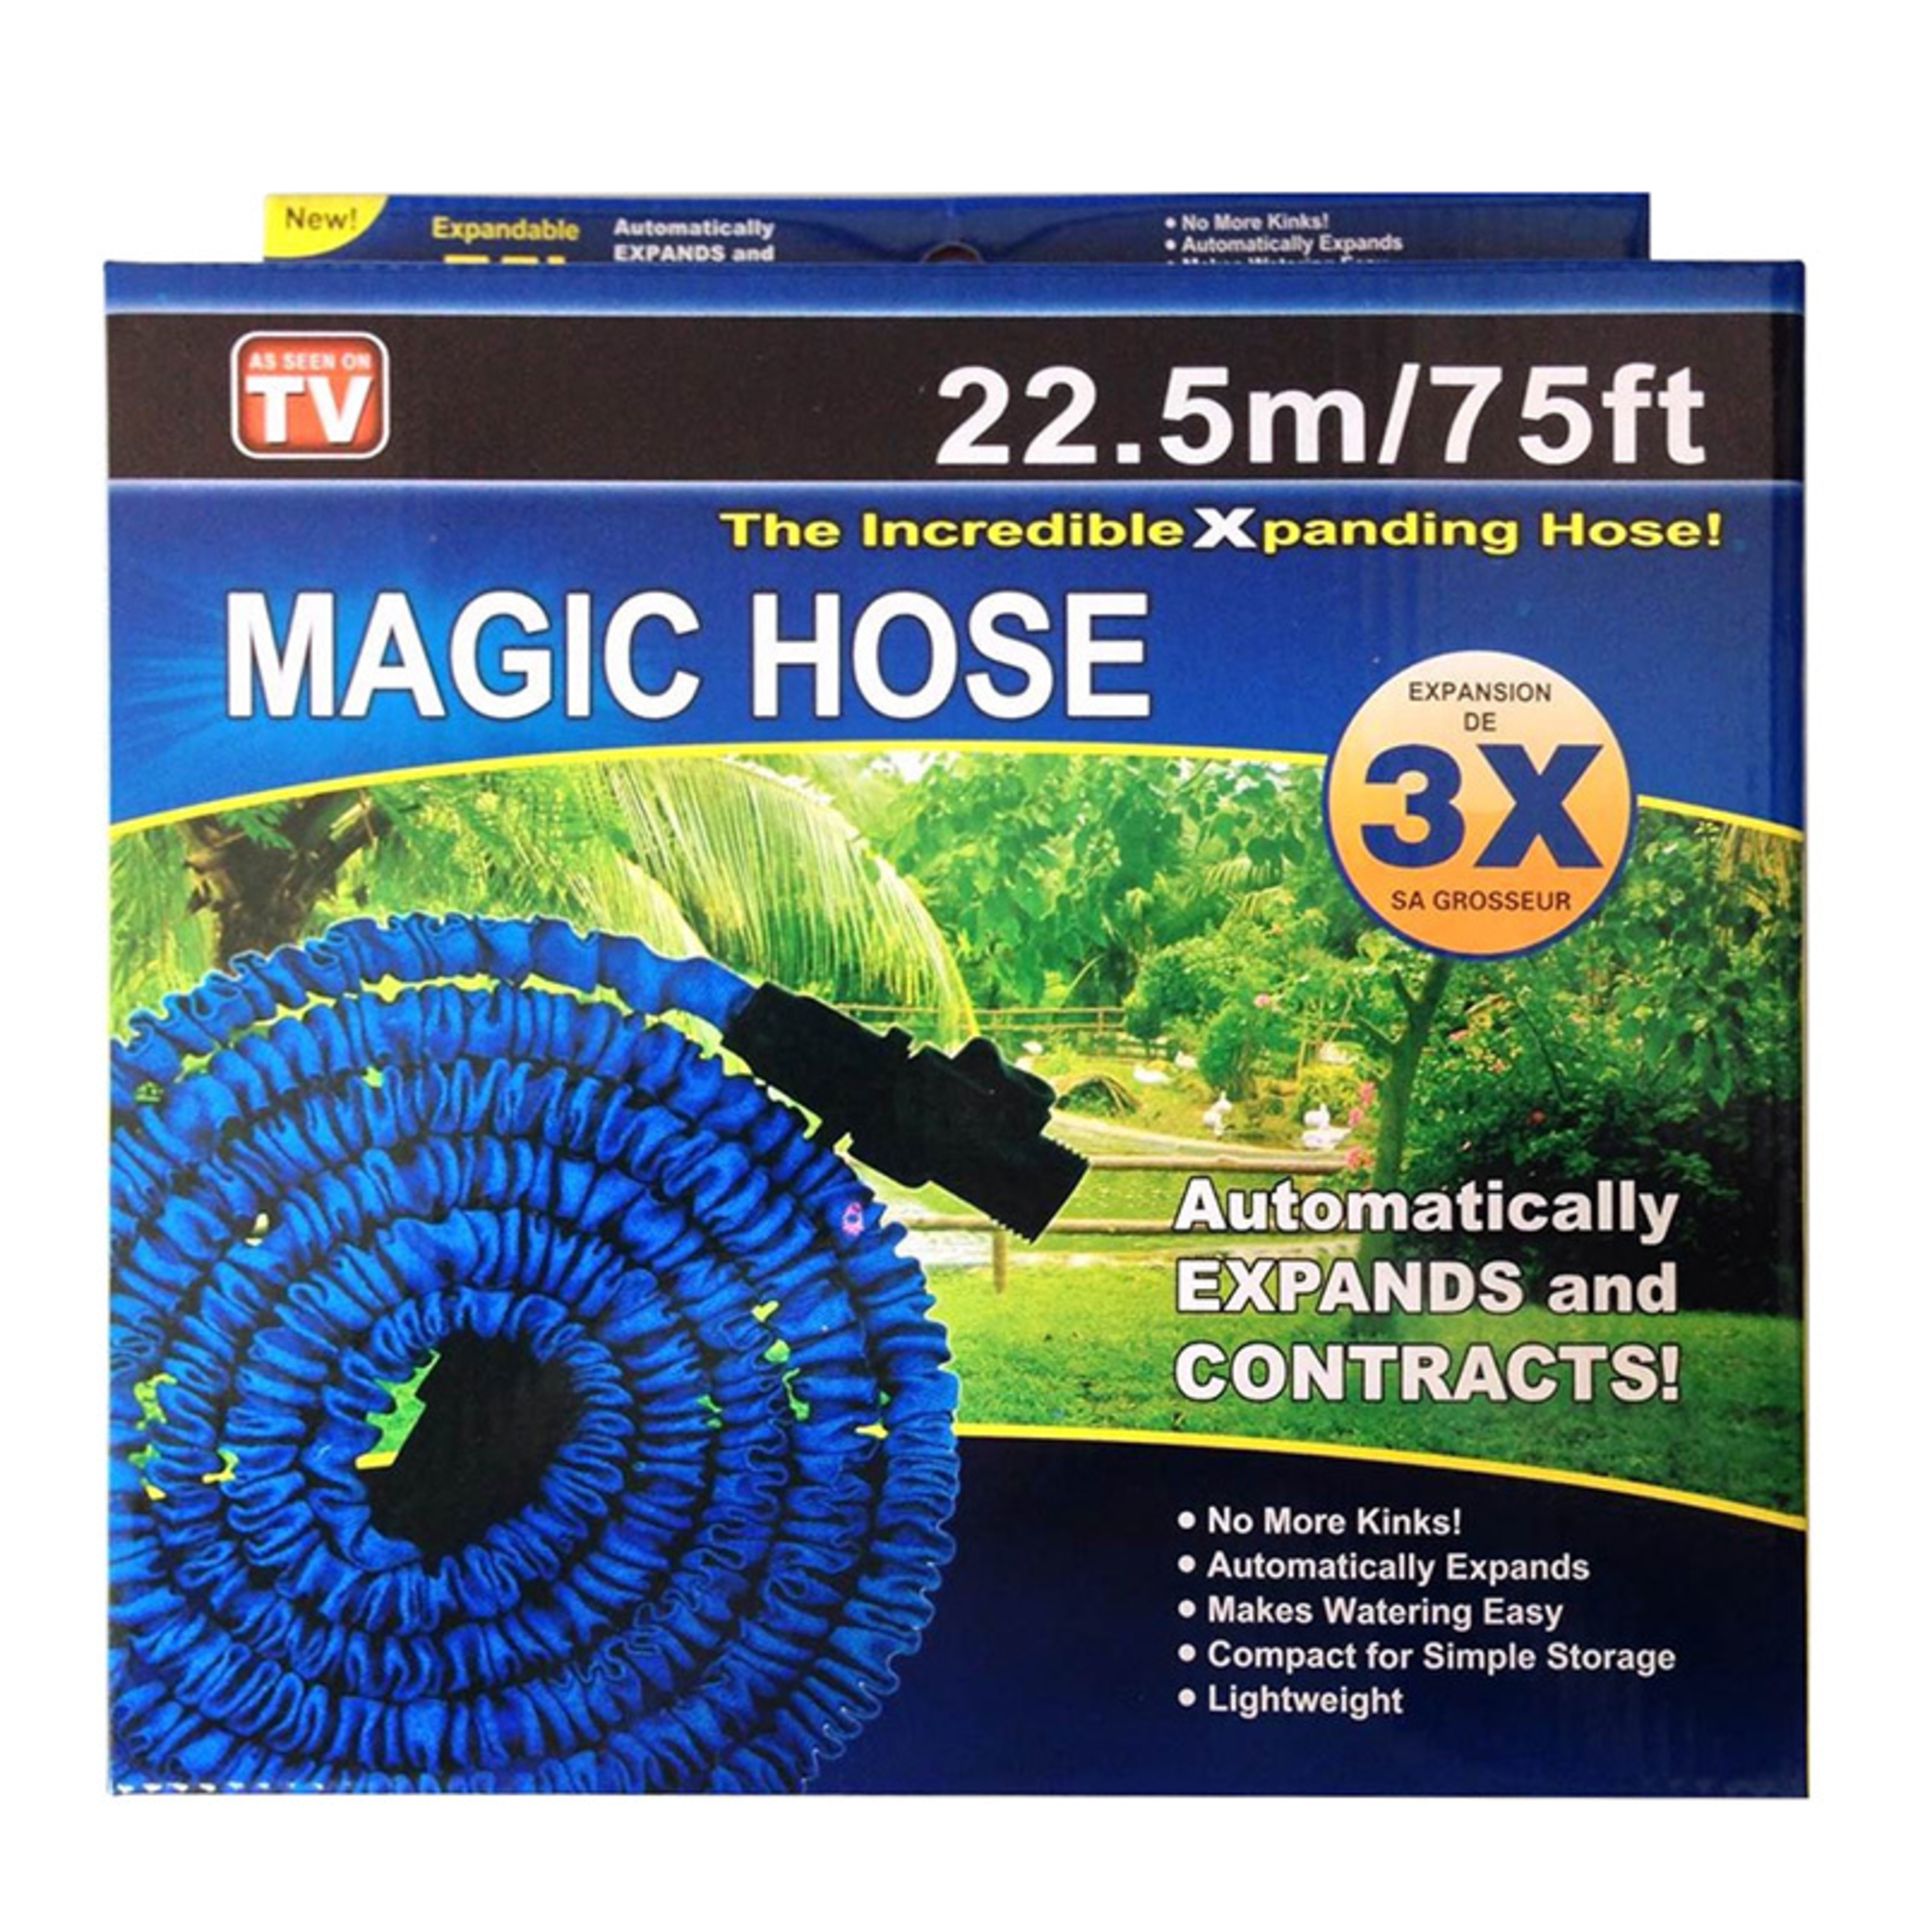 V Brand New 50 foot (15 metre) Incredible Magic Hose (As Seen On TV) - Automatically Expands And